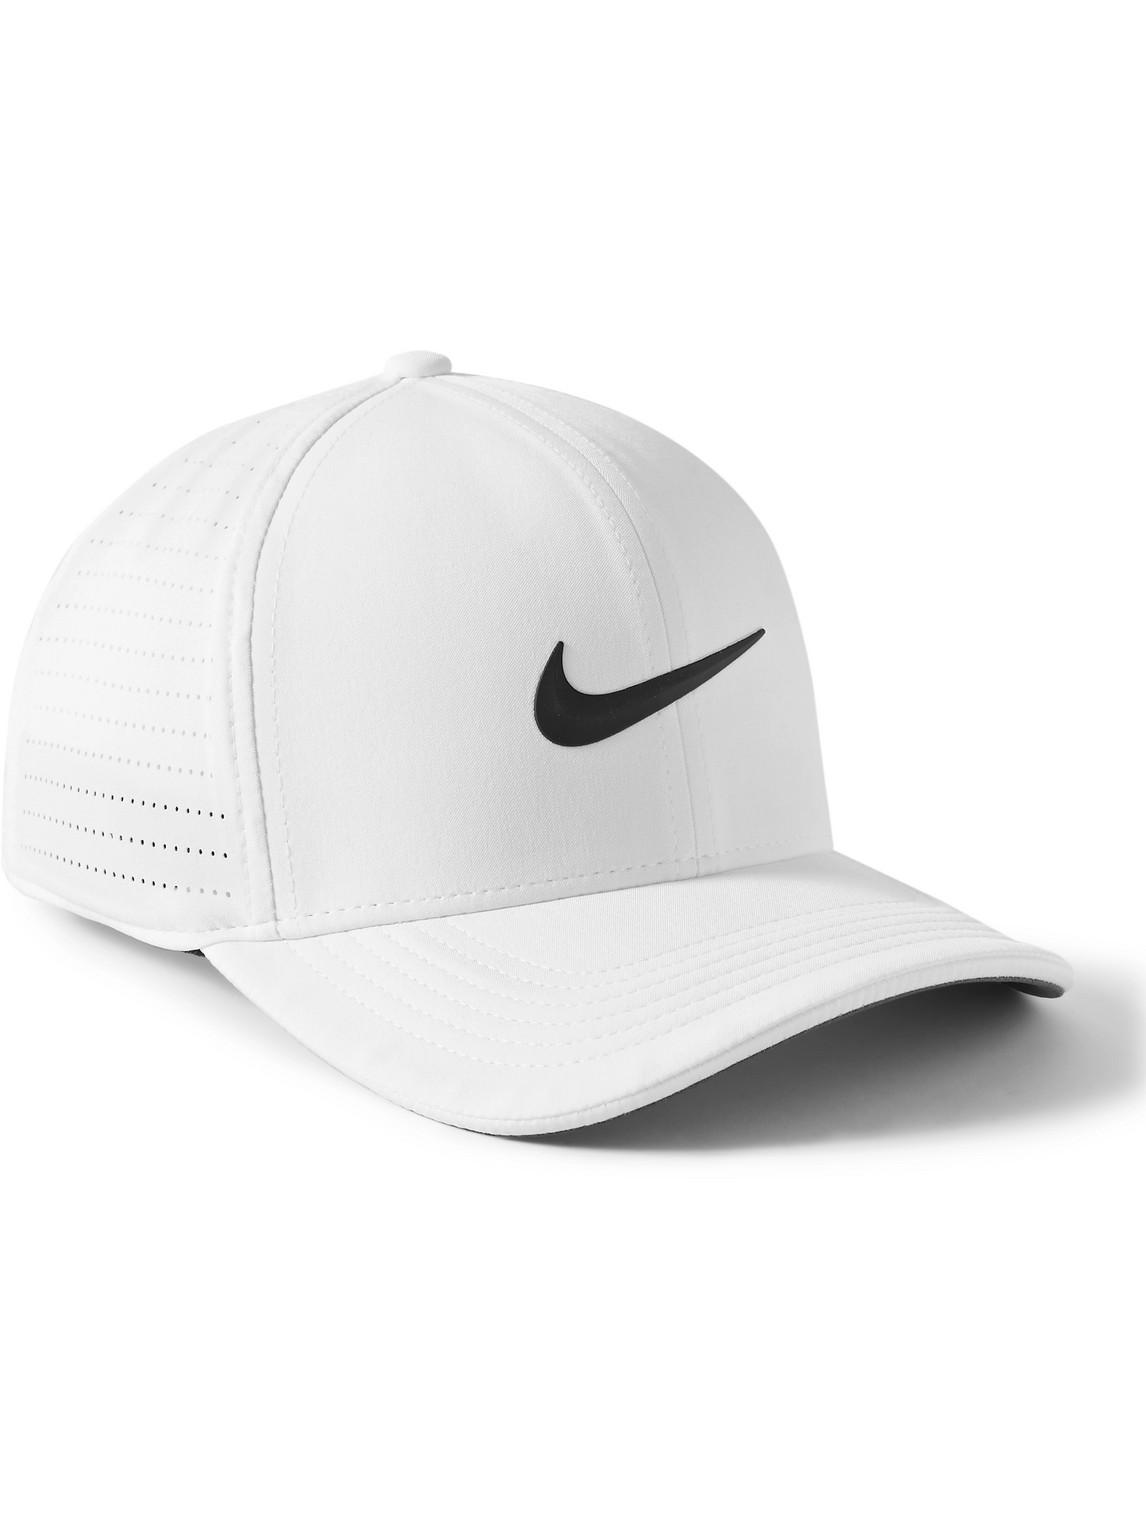 Nike Aerobill Classic99 Perforated Dri-fit Adv Golf Cap in White for Men |  Lyst